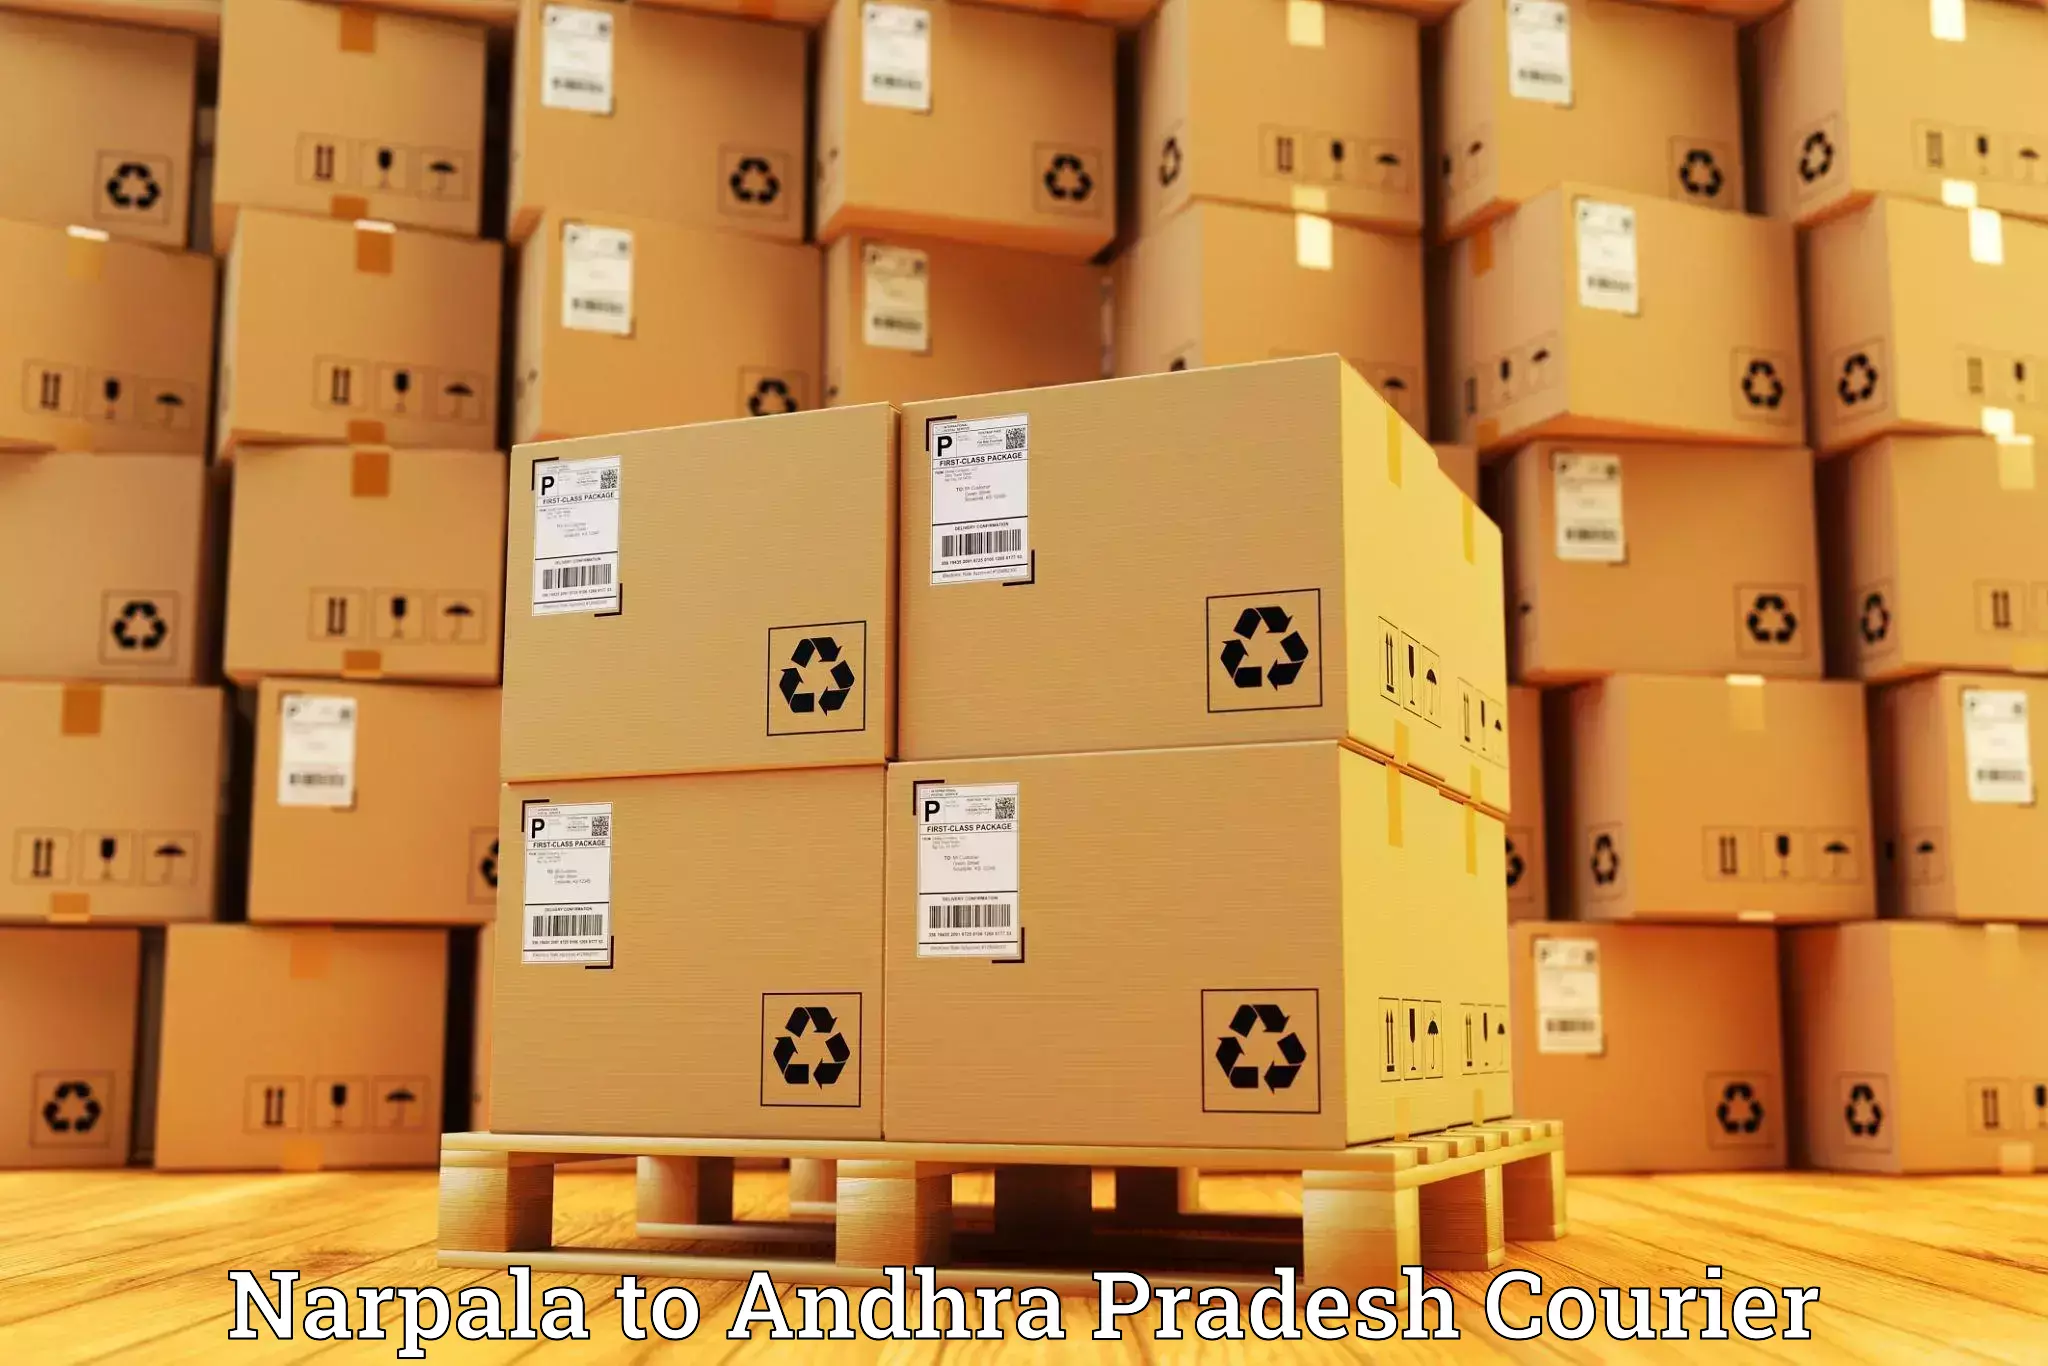 24/7 courier service Narpala to Cuddapah